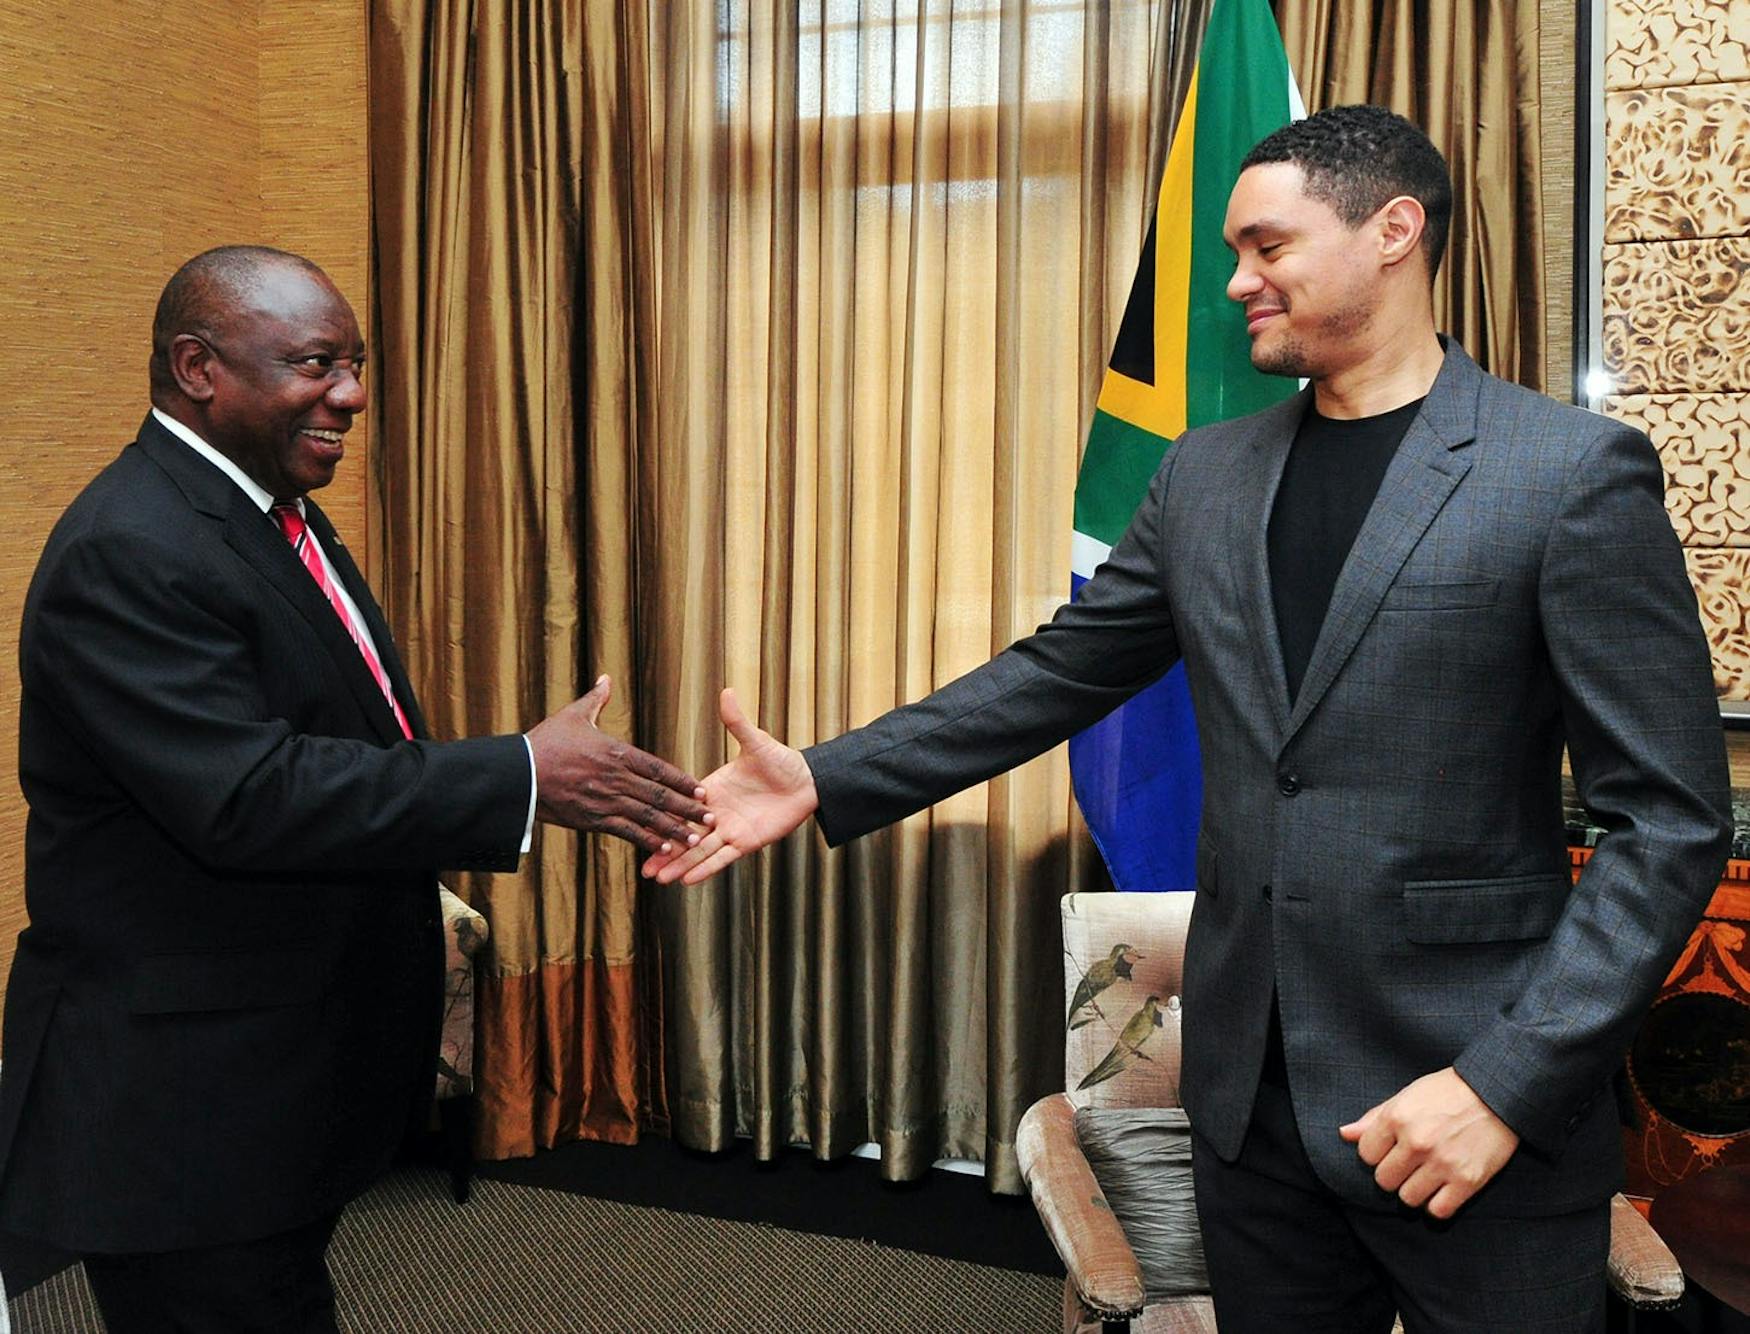 President Cyril Ramaphosa receives a courtesy call from renowned